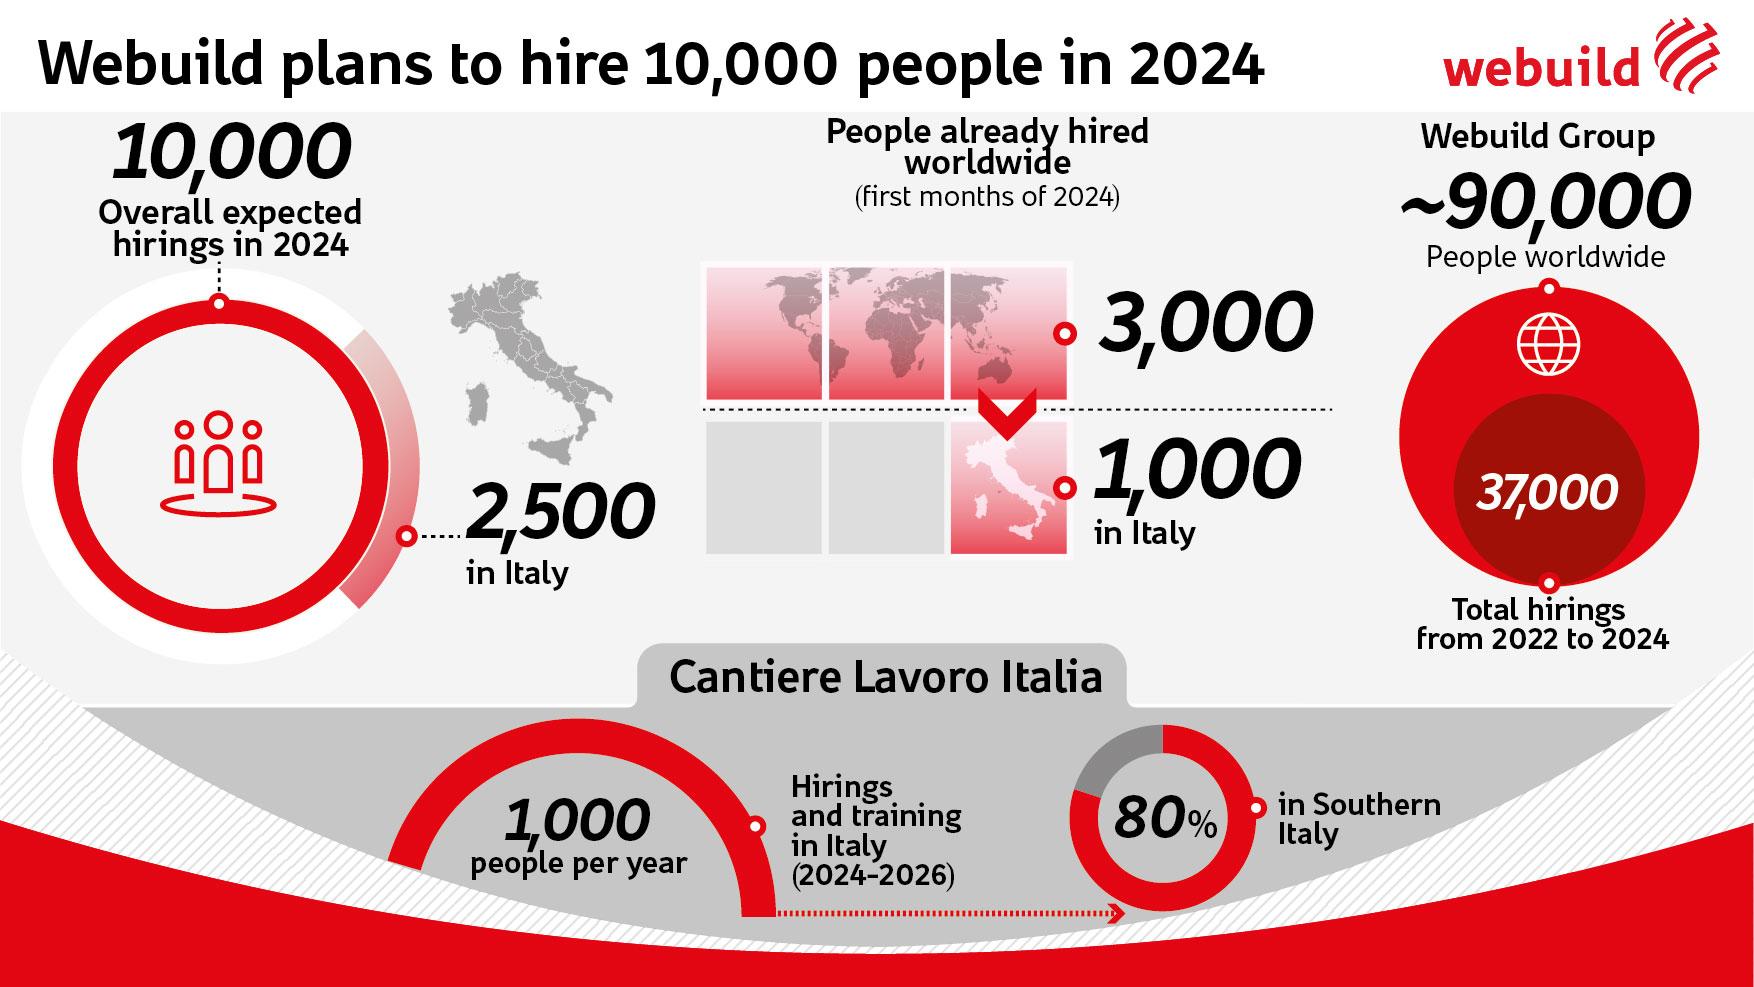 Cantiere Lavoro Italia, hiring and training programme of Webuild, inforaphic